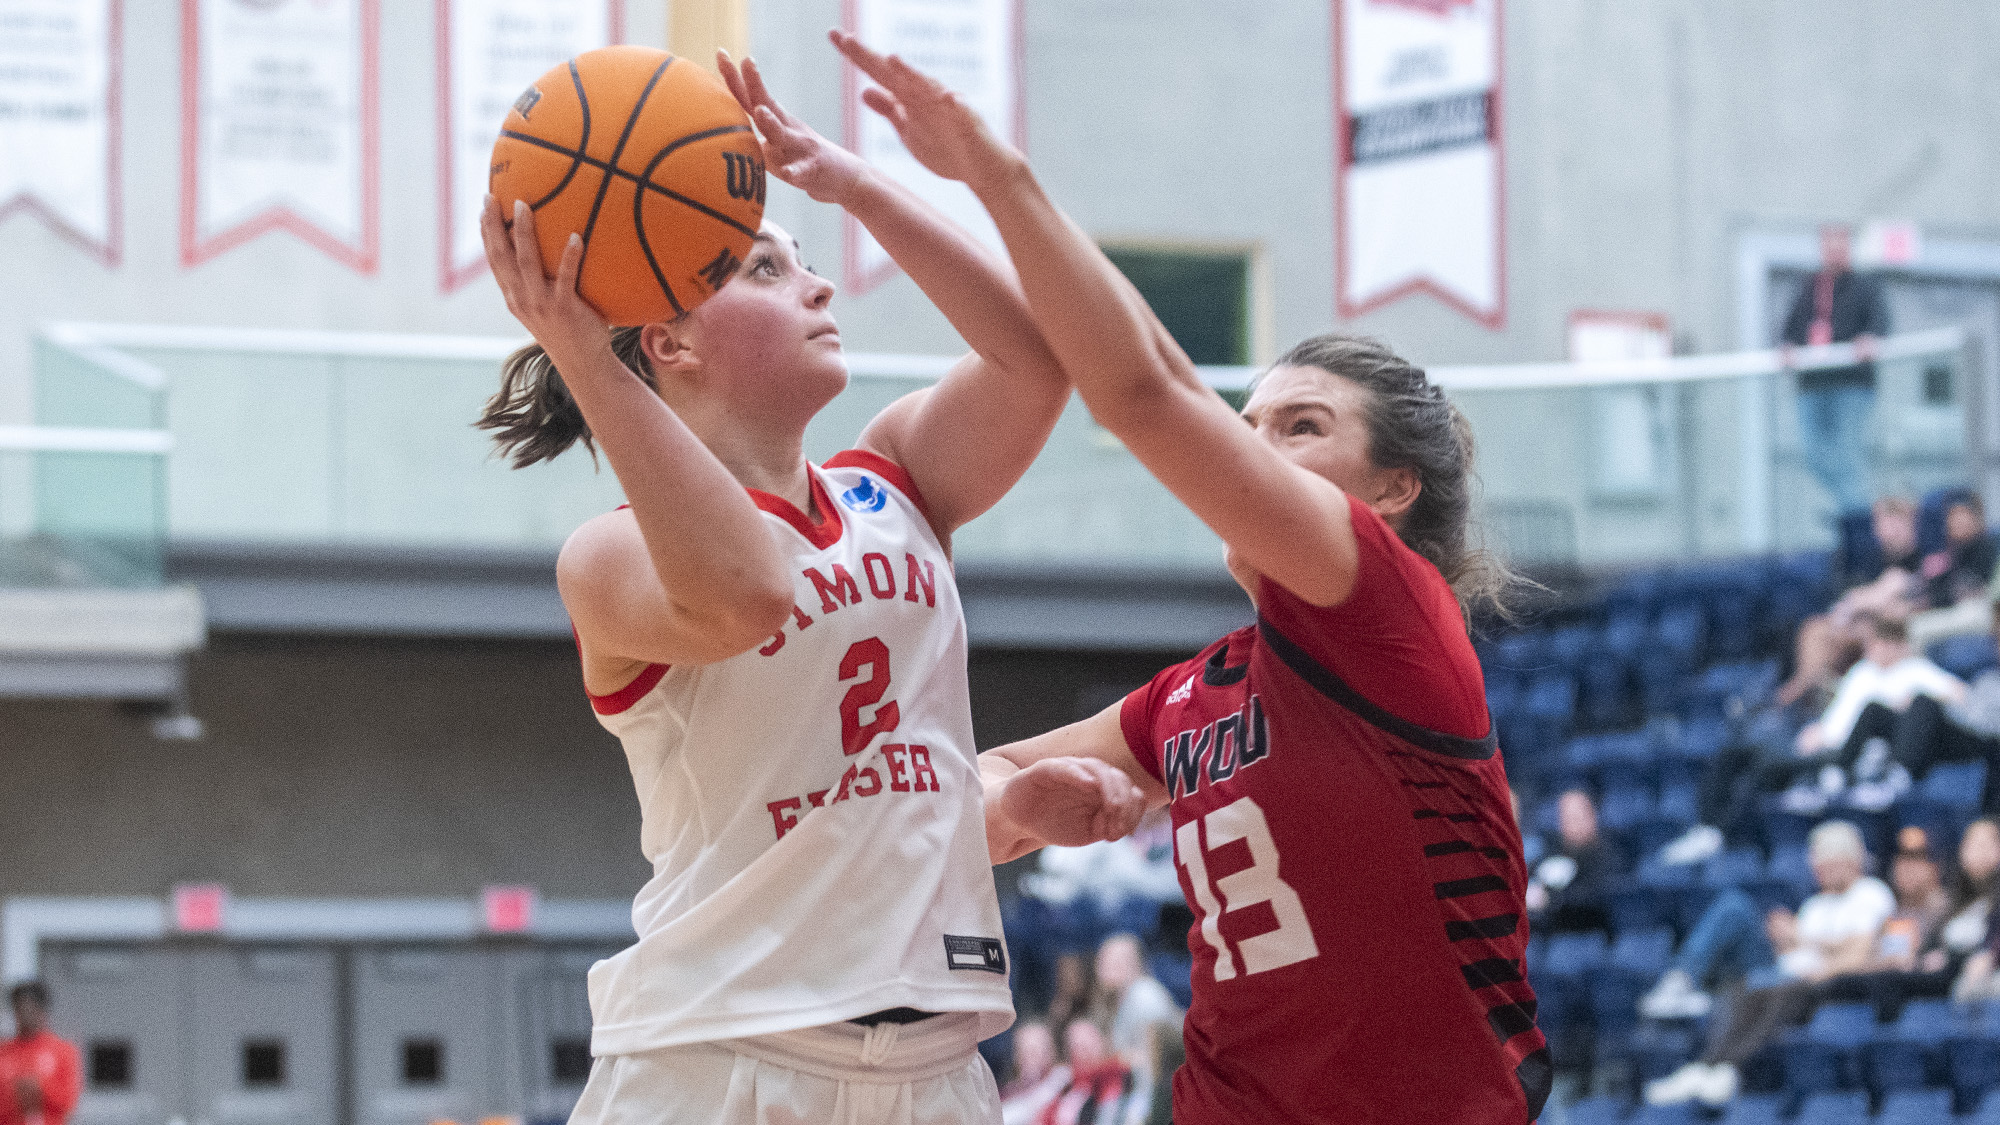 Photo of an SFU women’s basketball player trying to get a shot off against an opponent.